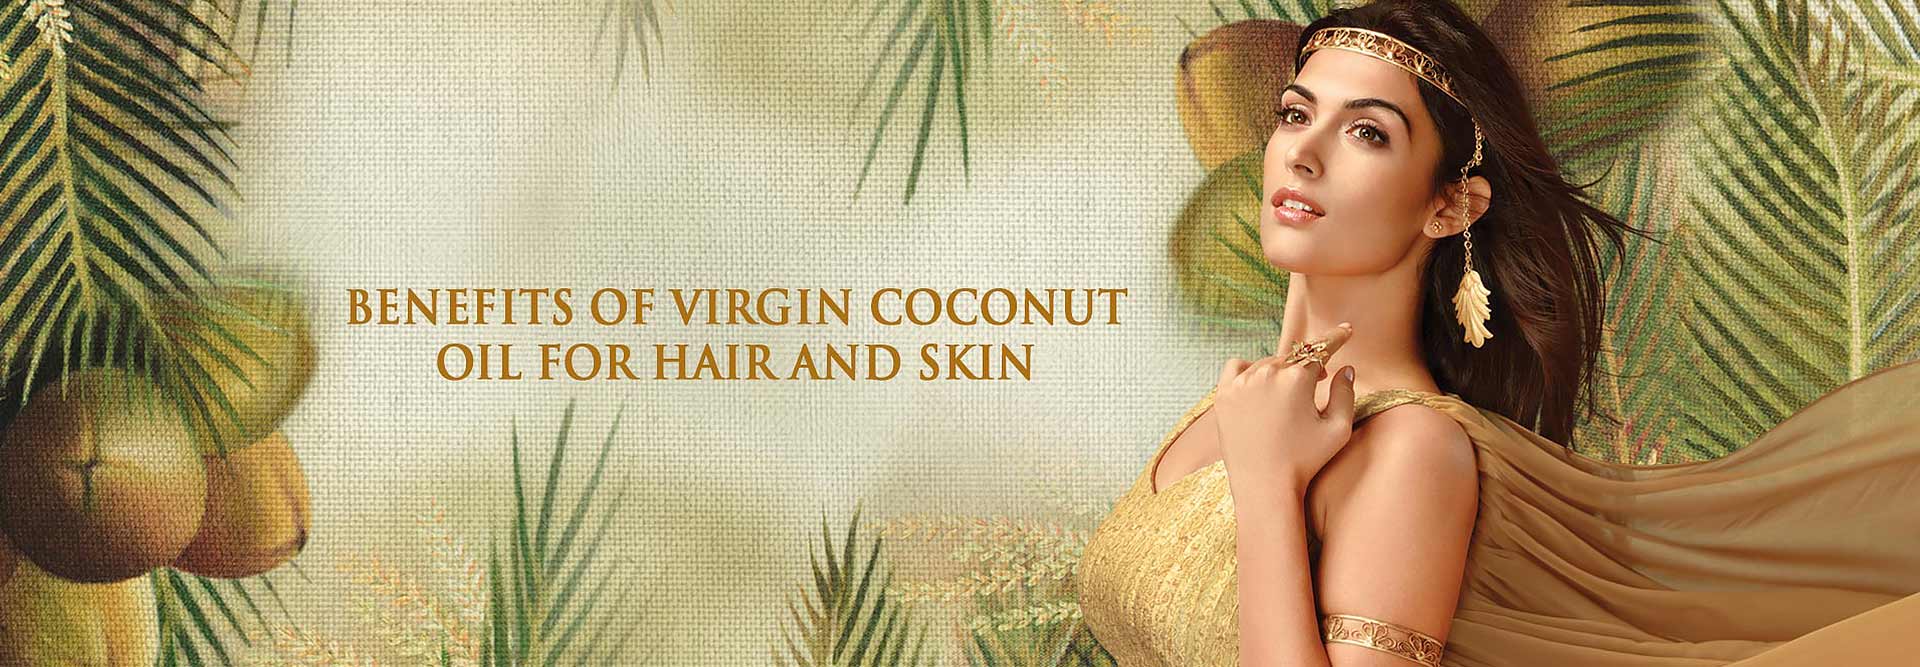 Benefits Of Virgin Coconut Oil For Hair And Skin